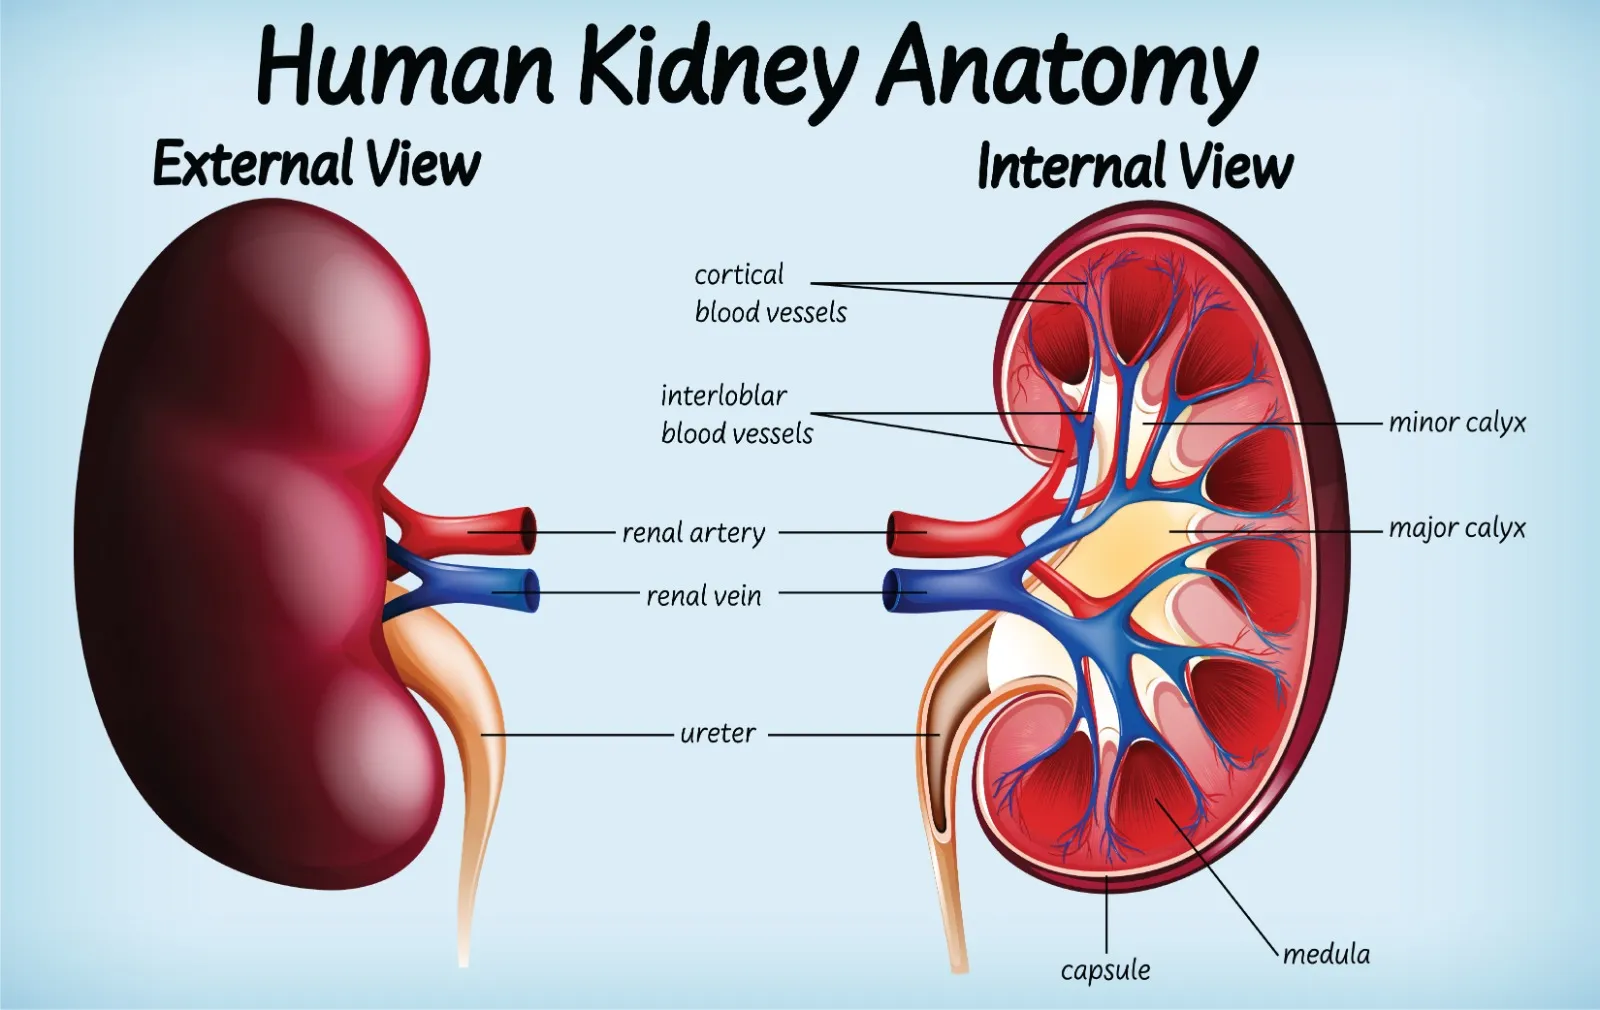 Keep your kidney healthy